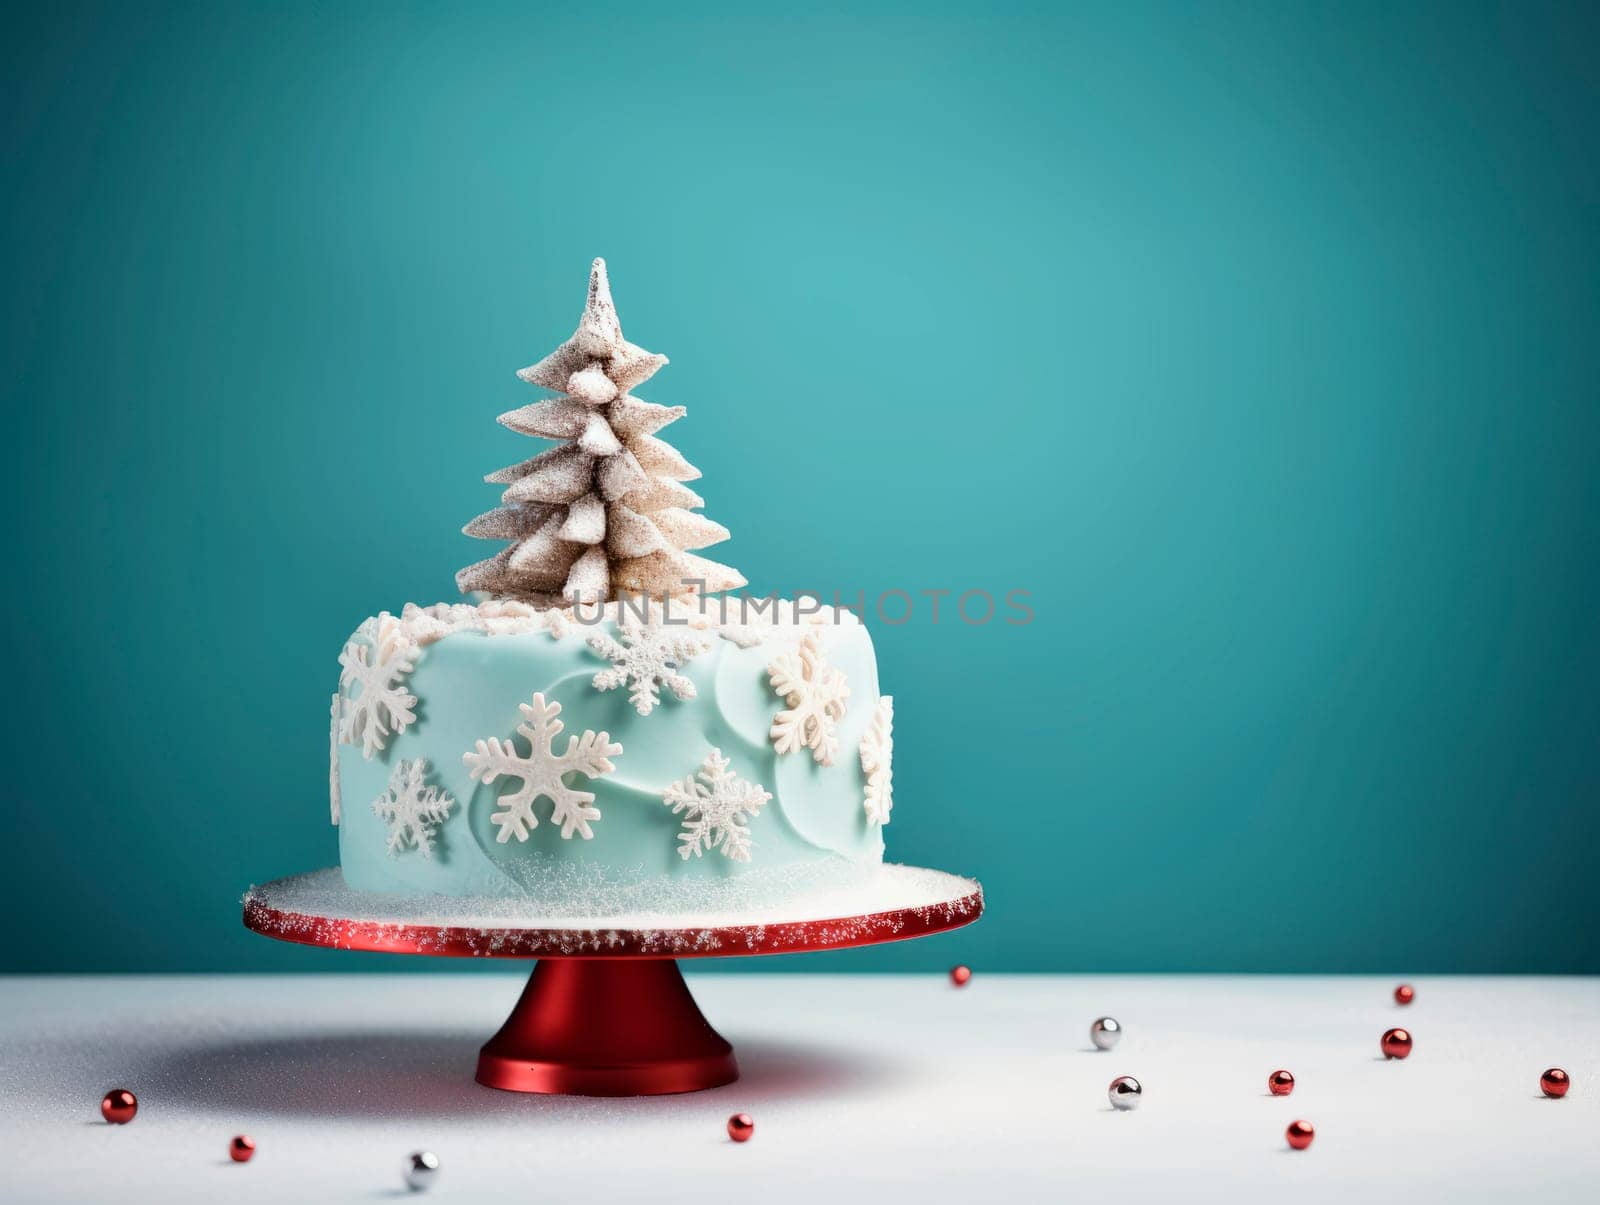 Beautiful creative Christmas cake with decoration in the form of a Christmas tree. by Spirina